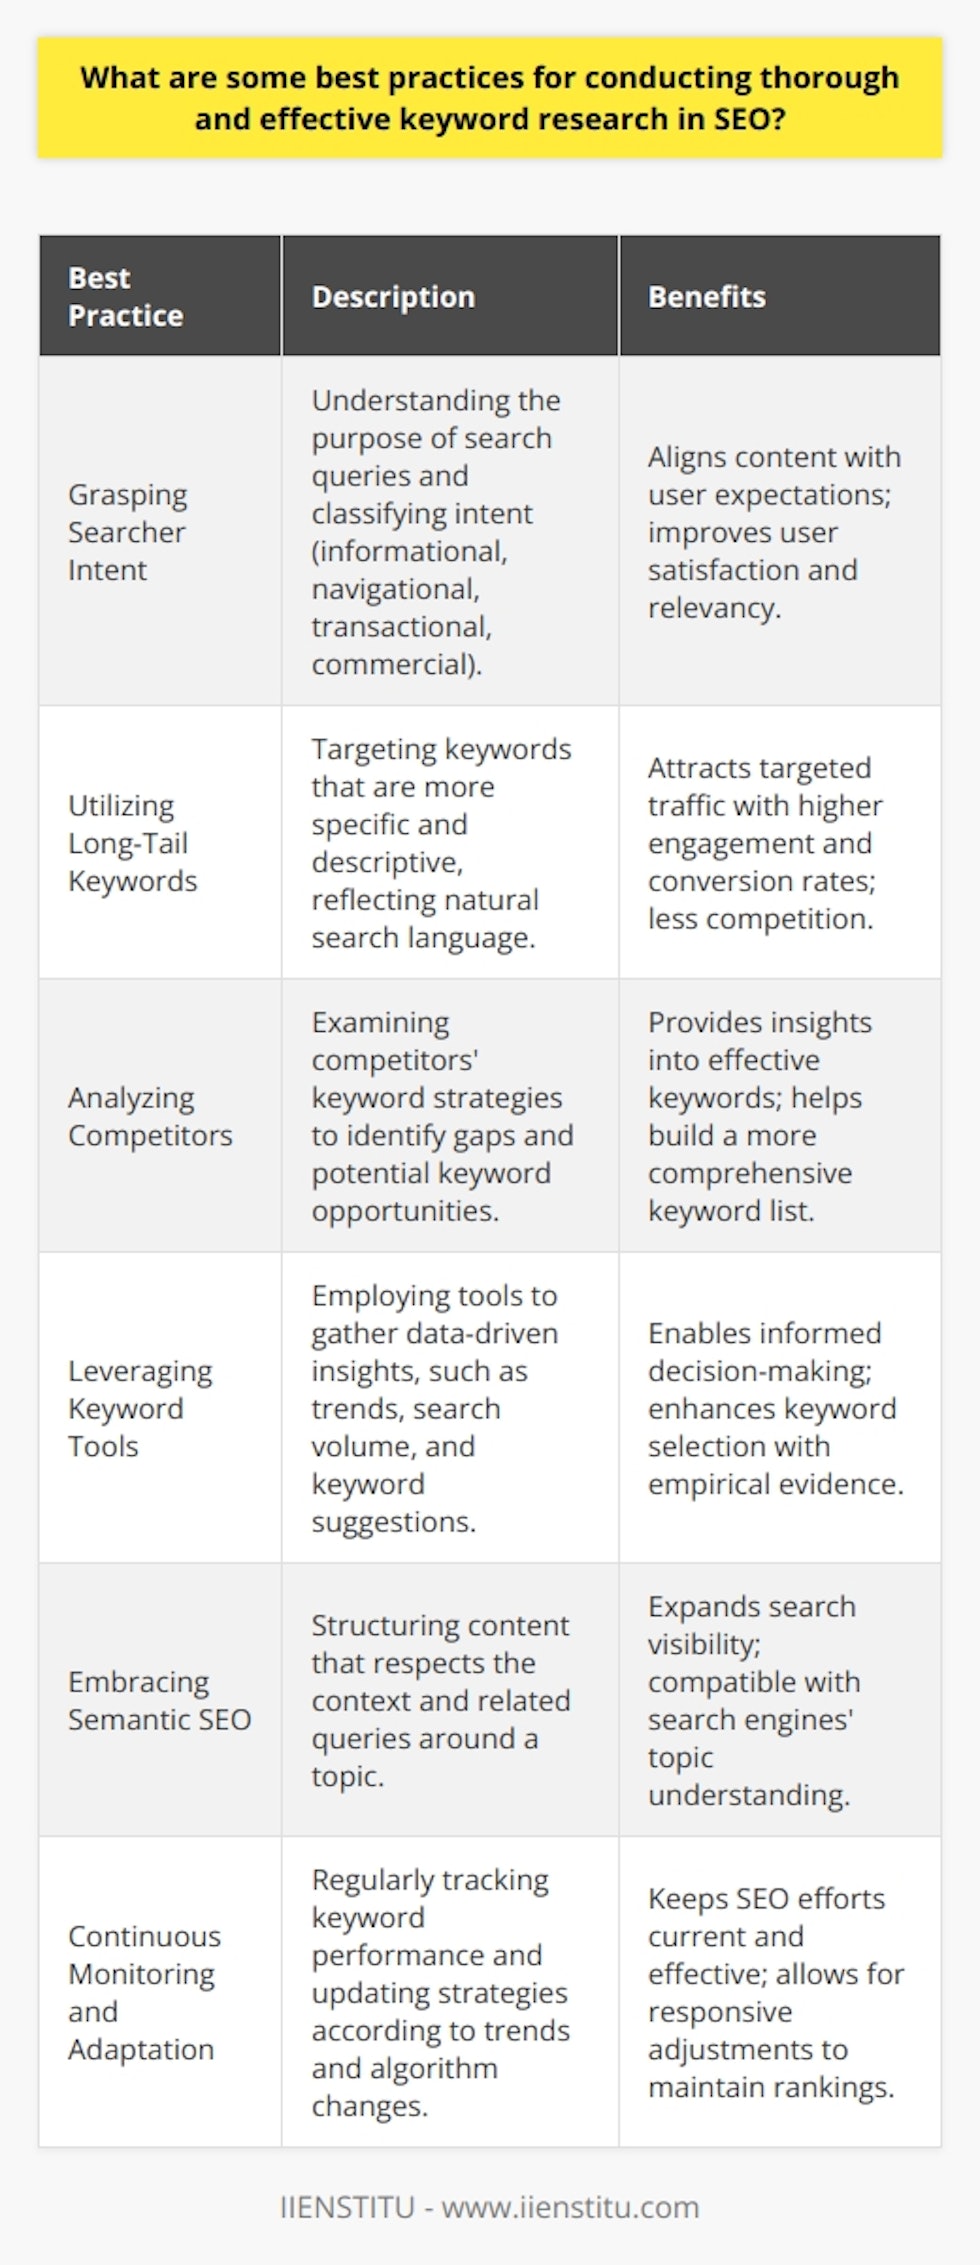 Effective keyword research is a fundamental aspect of SEO that can dramatically enhance the visibility and success of online content. Here's a comprehensive look at the best practices for carrying out keyword research that stands out in efficiency and precision.1. Grasping Searcher Intent:Understanding the intent behind search queries is crucial. Classifying intent into categories such as informational, navigational, transactional, or commercial helps in aligning content with user expectations. This involves aligning content to either answer questions, provide directions, facilitate a sale, or compare services and products.2. Utilizing Long-Tail Keywords:Long-tail keywords are more descriptive and typically have less competition than broad terms. They allow websites to target specific demographics or interests. By focusing on these, a website can attract quality traffic that's more likely to engage and convert. These keywords often mirror the natural language of searchers, making them more effective in satisfying user queries.3. Analyzing Competitors:Studying competitors' keyword strategies can reveal opportunities to capitalize on missed or poorly targeted keywords. Tools can show where the competitors rank and what terms drive traffic to their sites. Borrowing from competitors' insights permits the formation of a more robust keyword list and improved content strategies.4. Leveraging Keyword Tools:Keyword research tools are indispensable in providing data-driven insights for SEO. These tools can offer suggestions based on actual search data, trends, and patterns which can be invaluable in crafting a targeted keyword approach.5. Embracing Semantic SEO:Semantic SEO involves structuring content that understands and anticipates the contextual and related queries surrounding a topic. Integrating terms that are semantically linked to the main keywords ensures a broader search visibility and aligns with search engines' understanding of topics.6. Continuous Monitoring and Adaptation:SEO is not a set-and-forget strategy. Continuous monitoring of keyword performance allows for the identification of what works and what doesn’t. Adjusting strategies based on these insights ensures that keyword approaches remain effective in the face of algorithm updates and changing user behaviors.Best practices in keyword research require a balance of creative thinking, competitor analysis, strategic planning, and continuous refinement. By focusing on user intent, integrating long-tail keywords, learning from competitors, employing powerful research tools, and adapting to new SEO trends, content creators can consistently improve their online presence and reach their desired audiences with precision. With such strategies in place, SEO efforts are far more likely to yield tangible results, driving quality traffic and boosting online visibility.